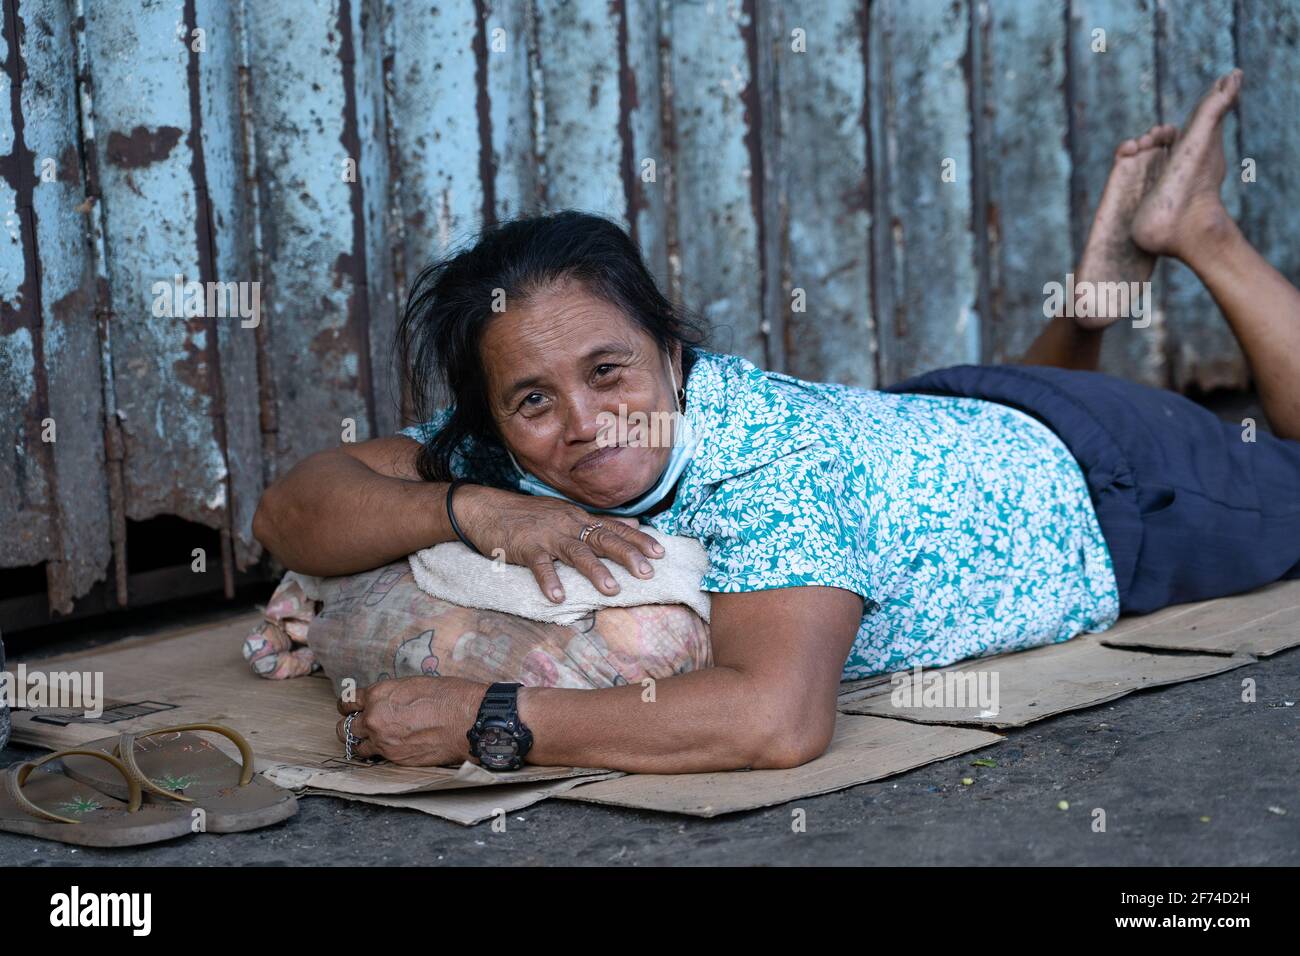 A homeless Filipino woman smiles towards the camera whilst lying on the side street on cardboard where she sleeps Stock Photo